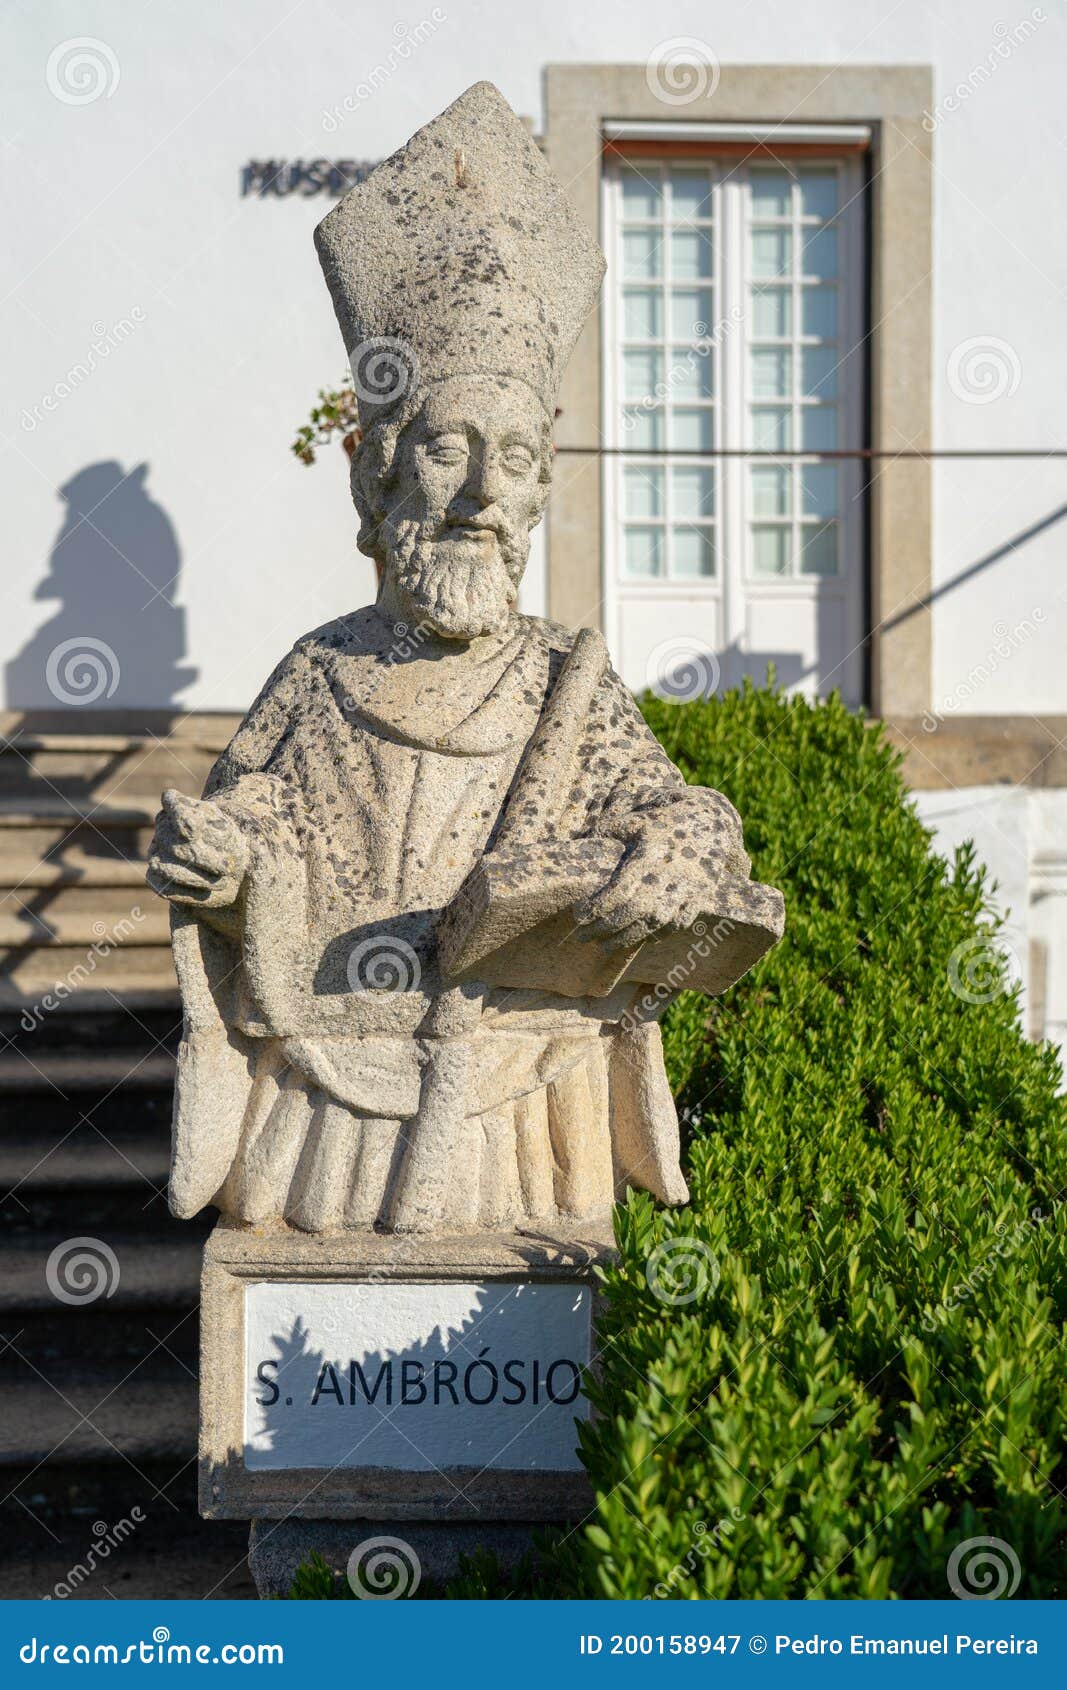 stone statue representing the prudence belonging to the episcopal garden of the city of castelo branco